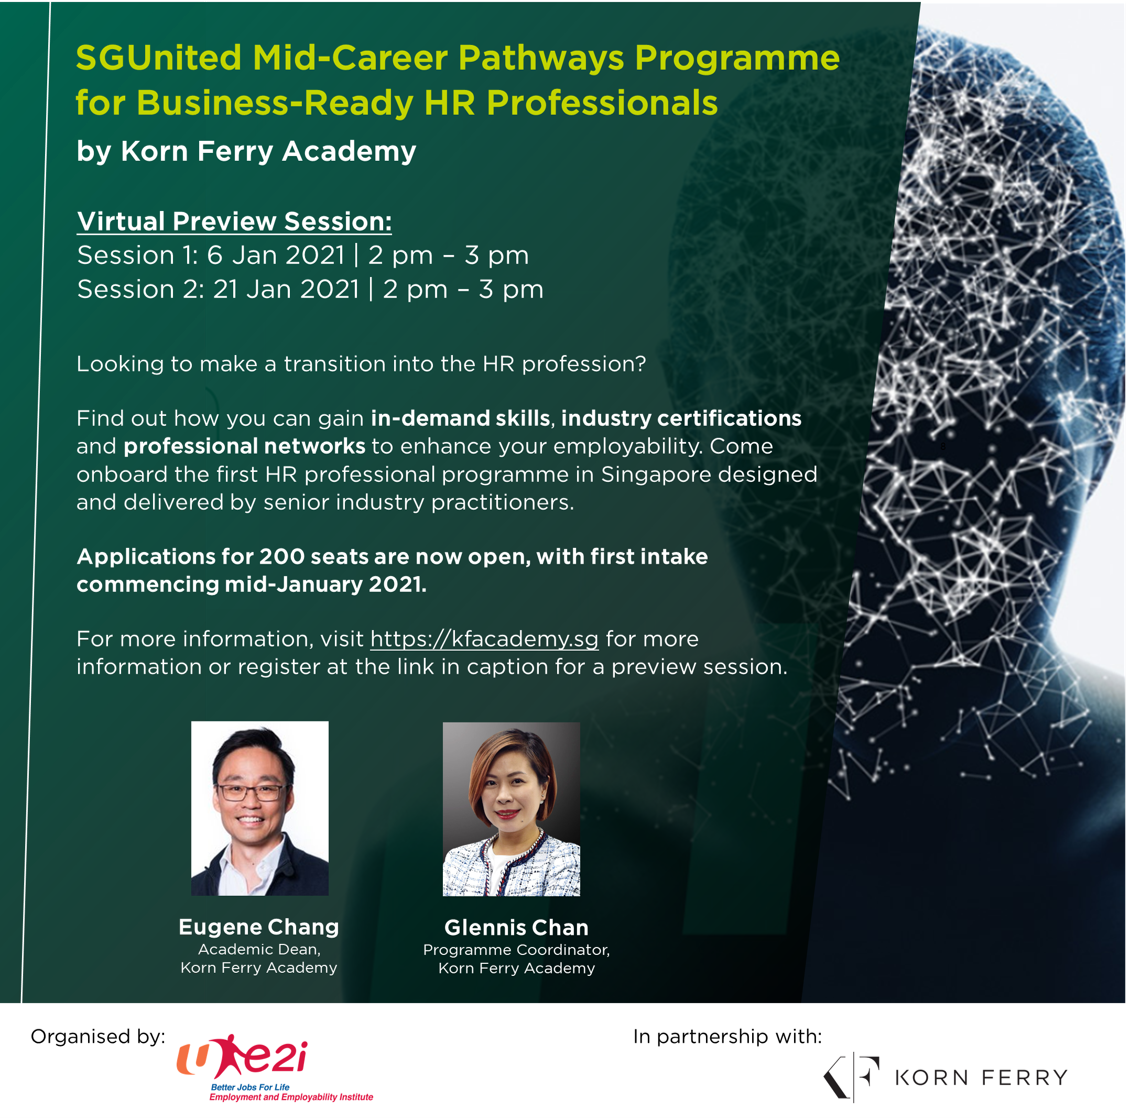 Insights To Korn Ferry Academy S Sgunited Mid Career Pathways Programme For Business Ready Hr Professionals 6 Jan 21 Employment And Employability Institute